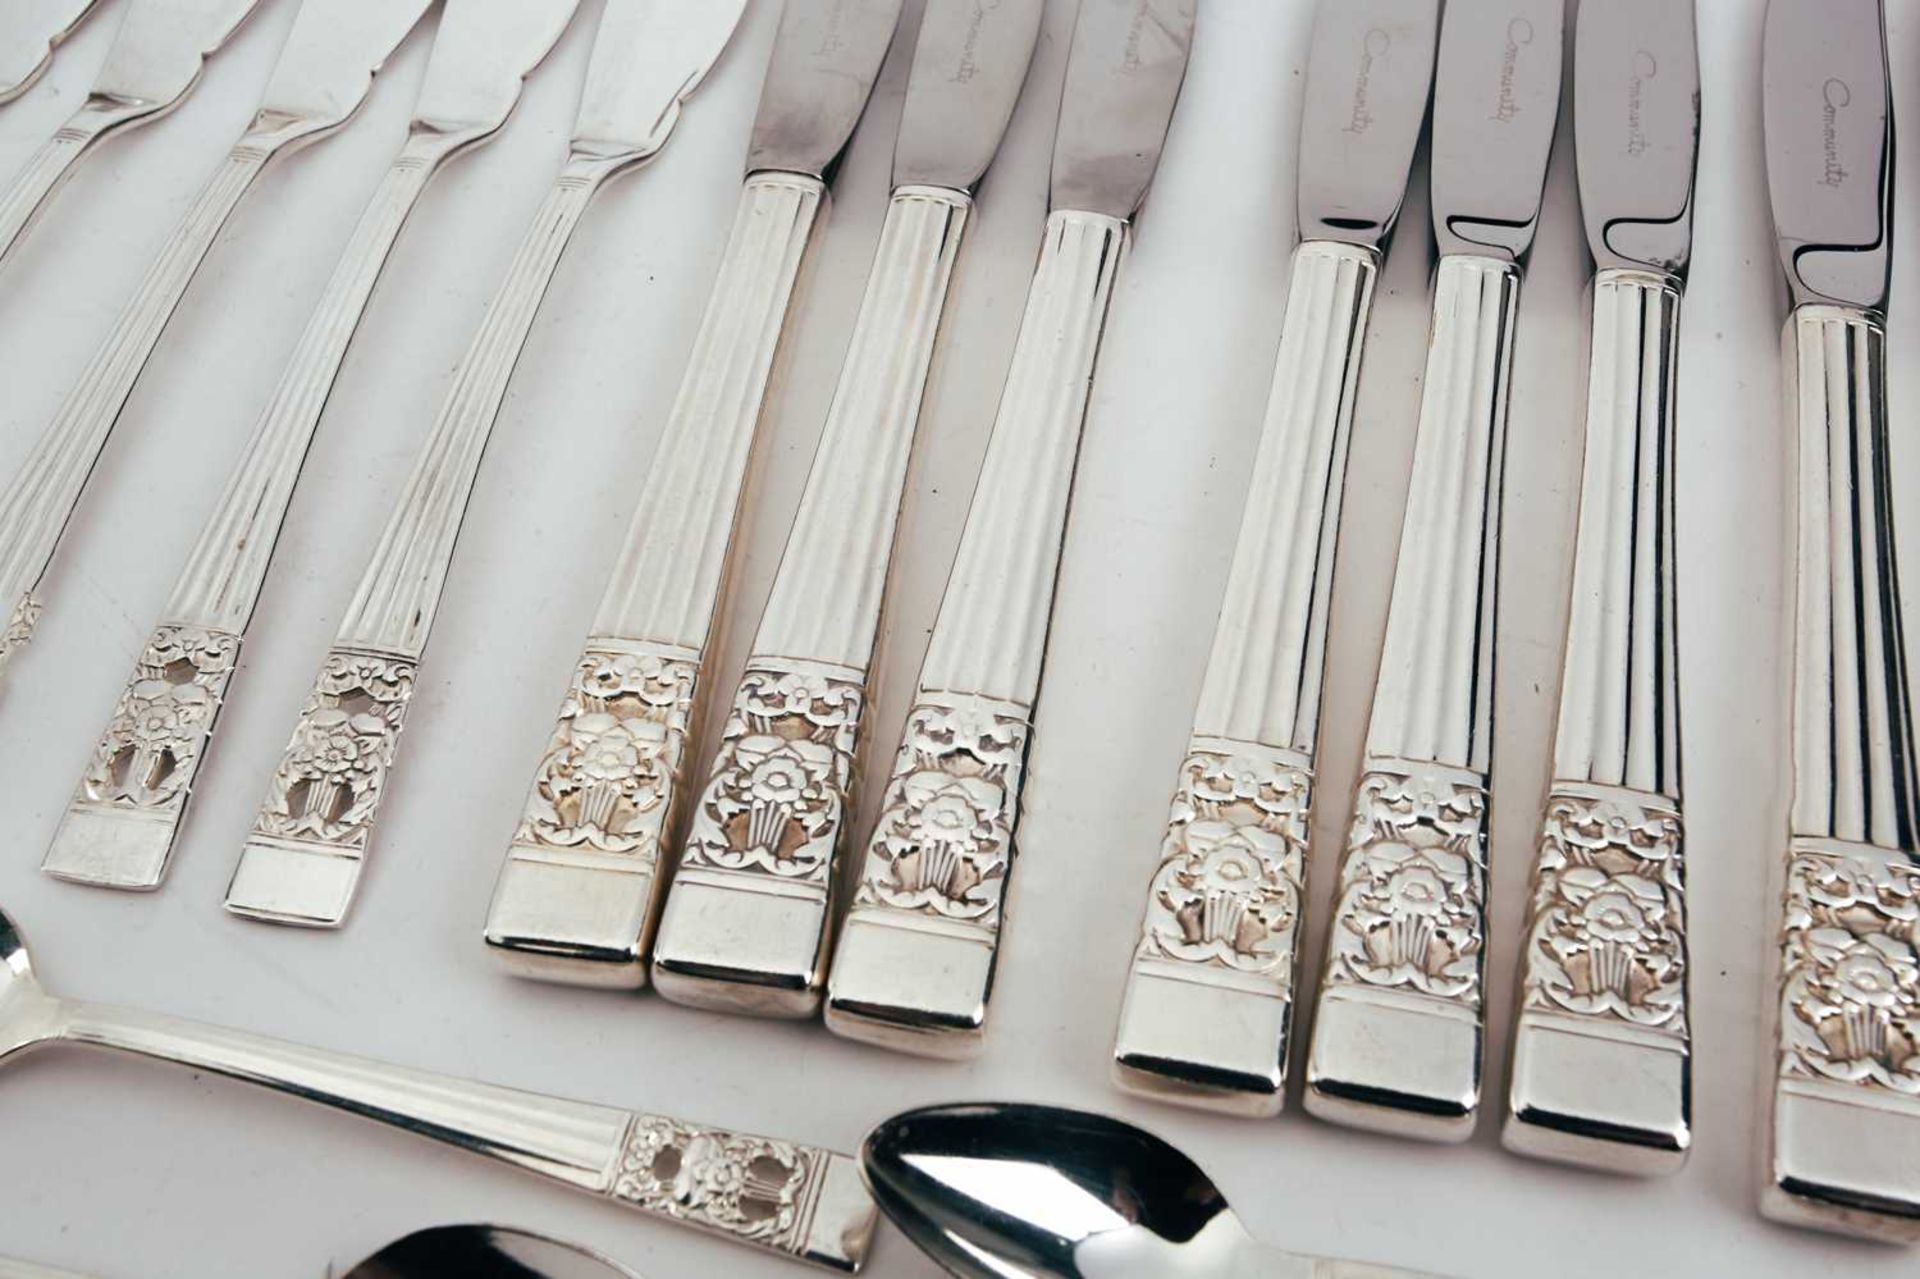 A tableware canteen of Community silver plate flatware, on four scroll legs, with three drawers; - Image 8 of 11